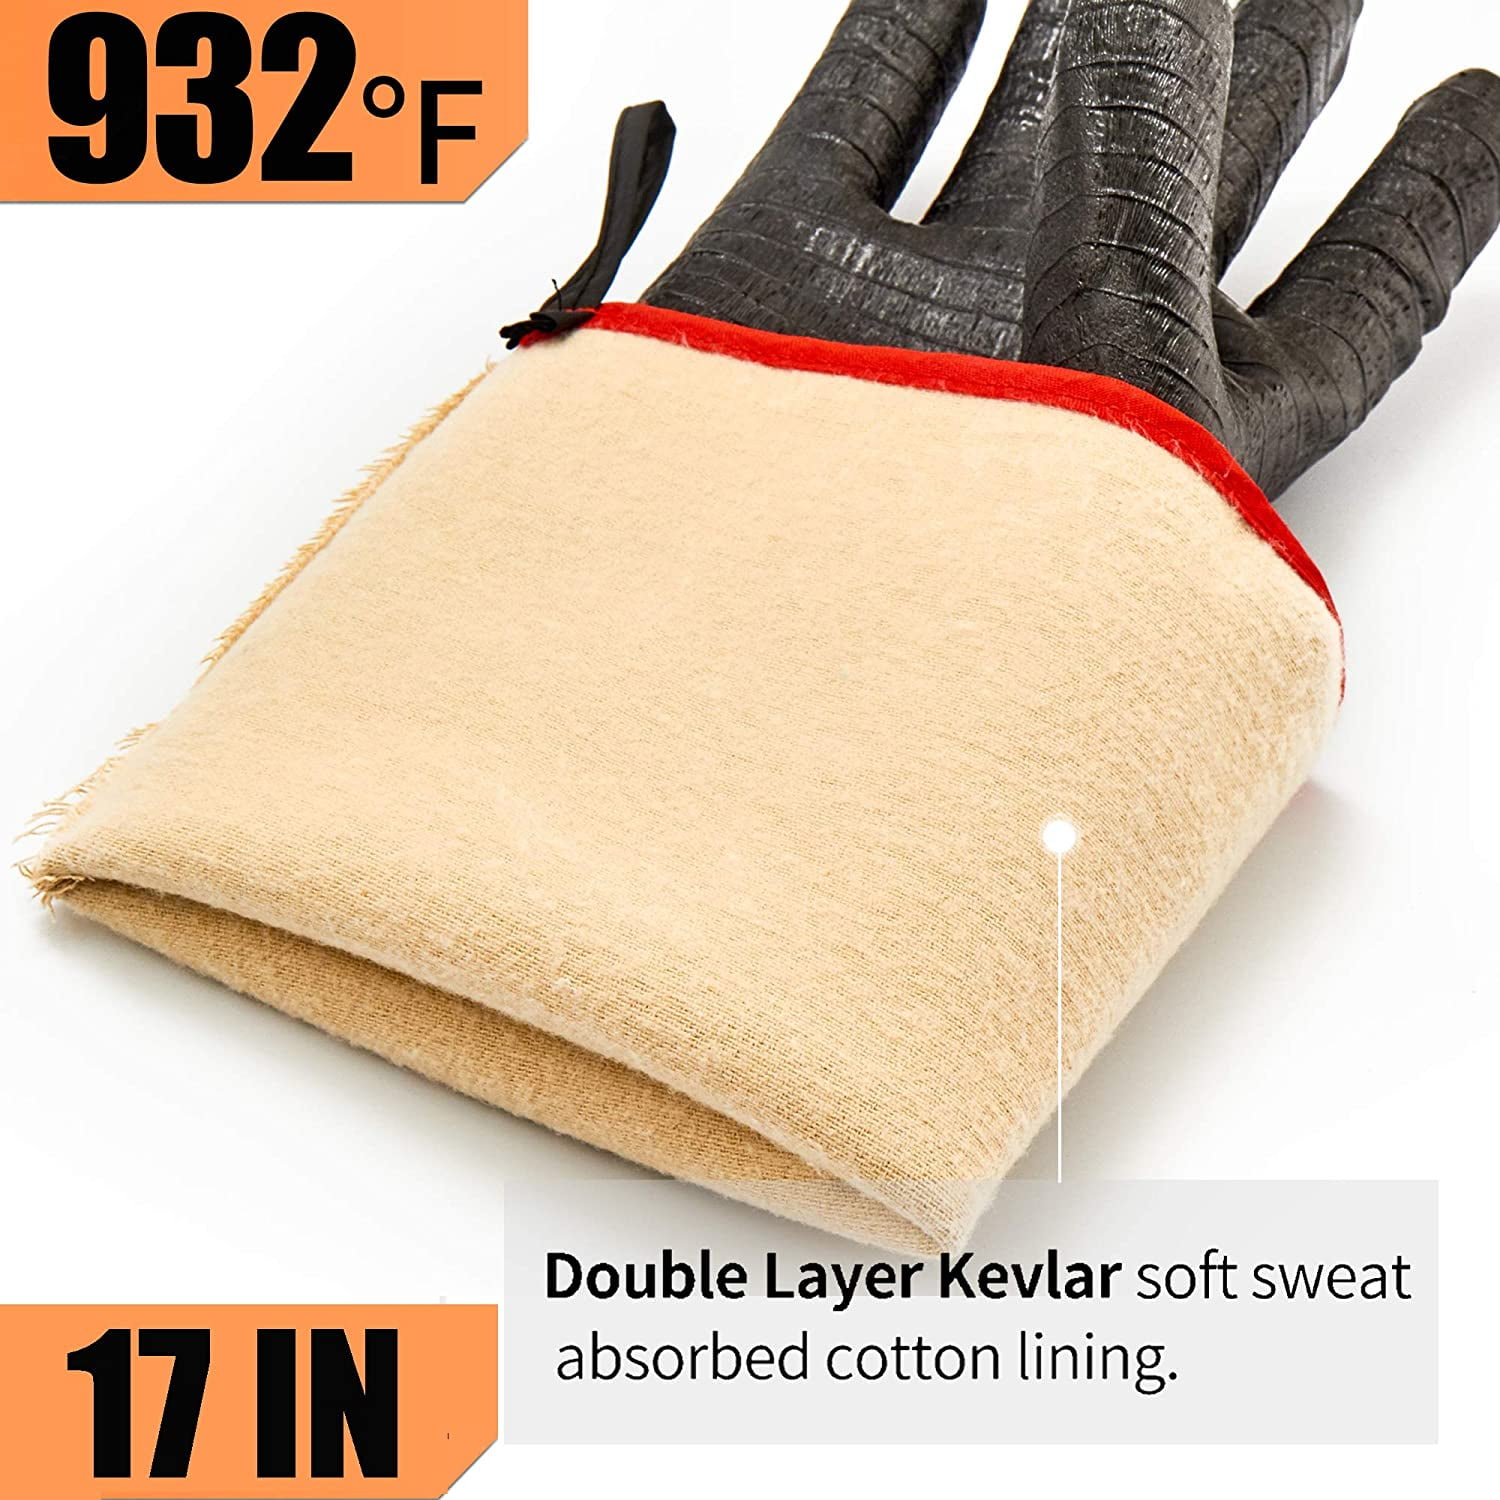 Neoprene Coating with Long Sleeve IOO BBQ Grill Gloves 932℉ Waterproof Grilling Gloves for Turkey Fryer Oven Baking 